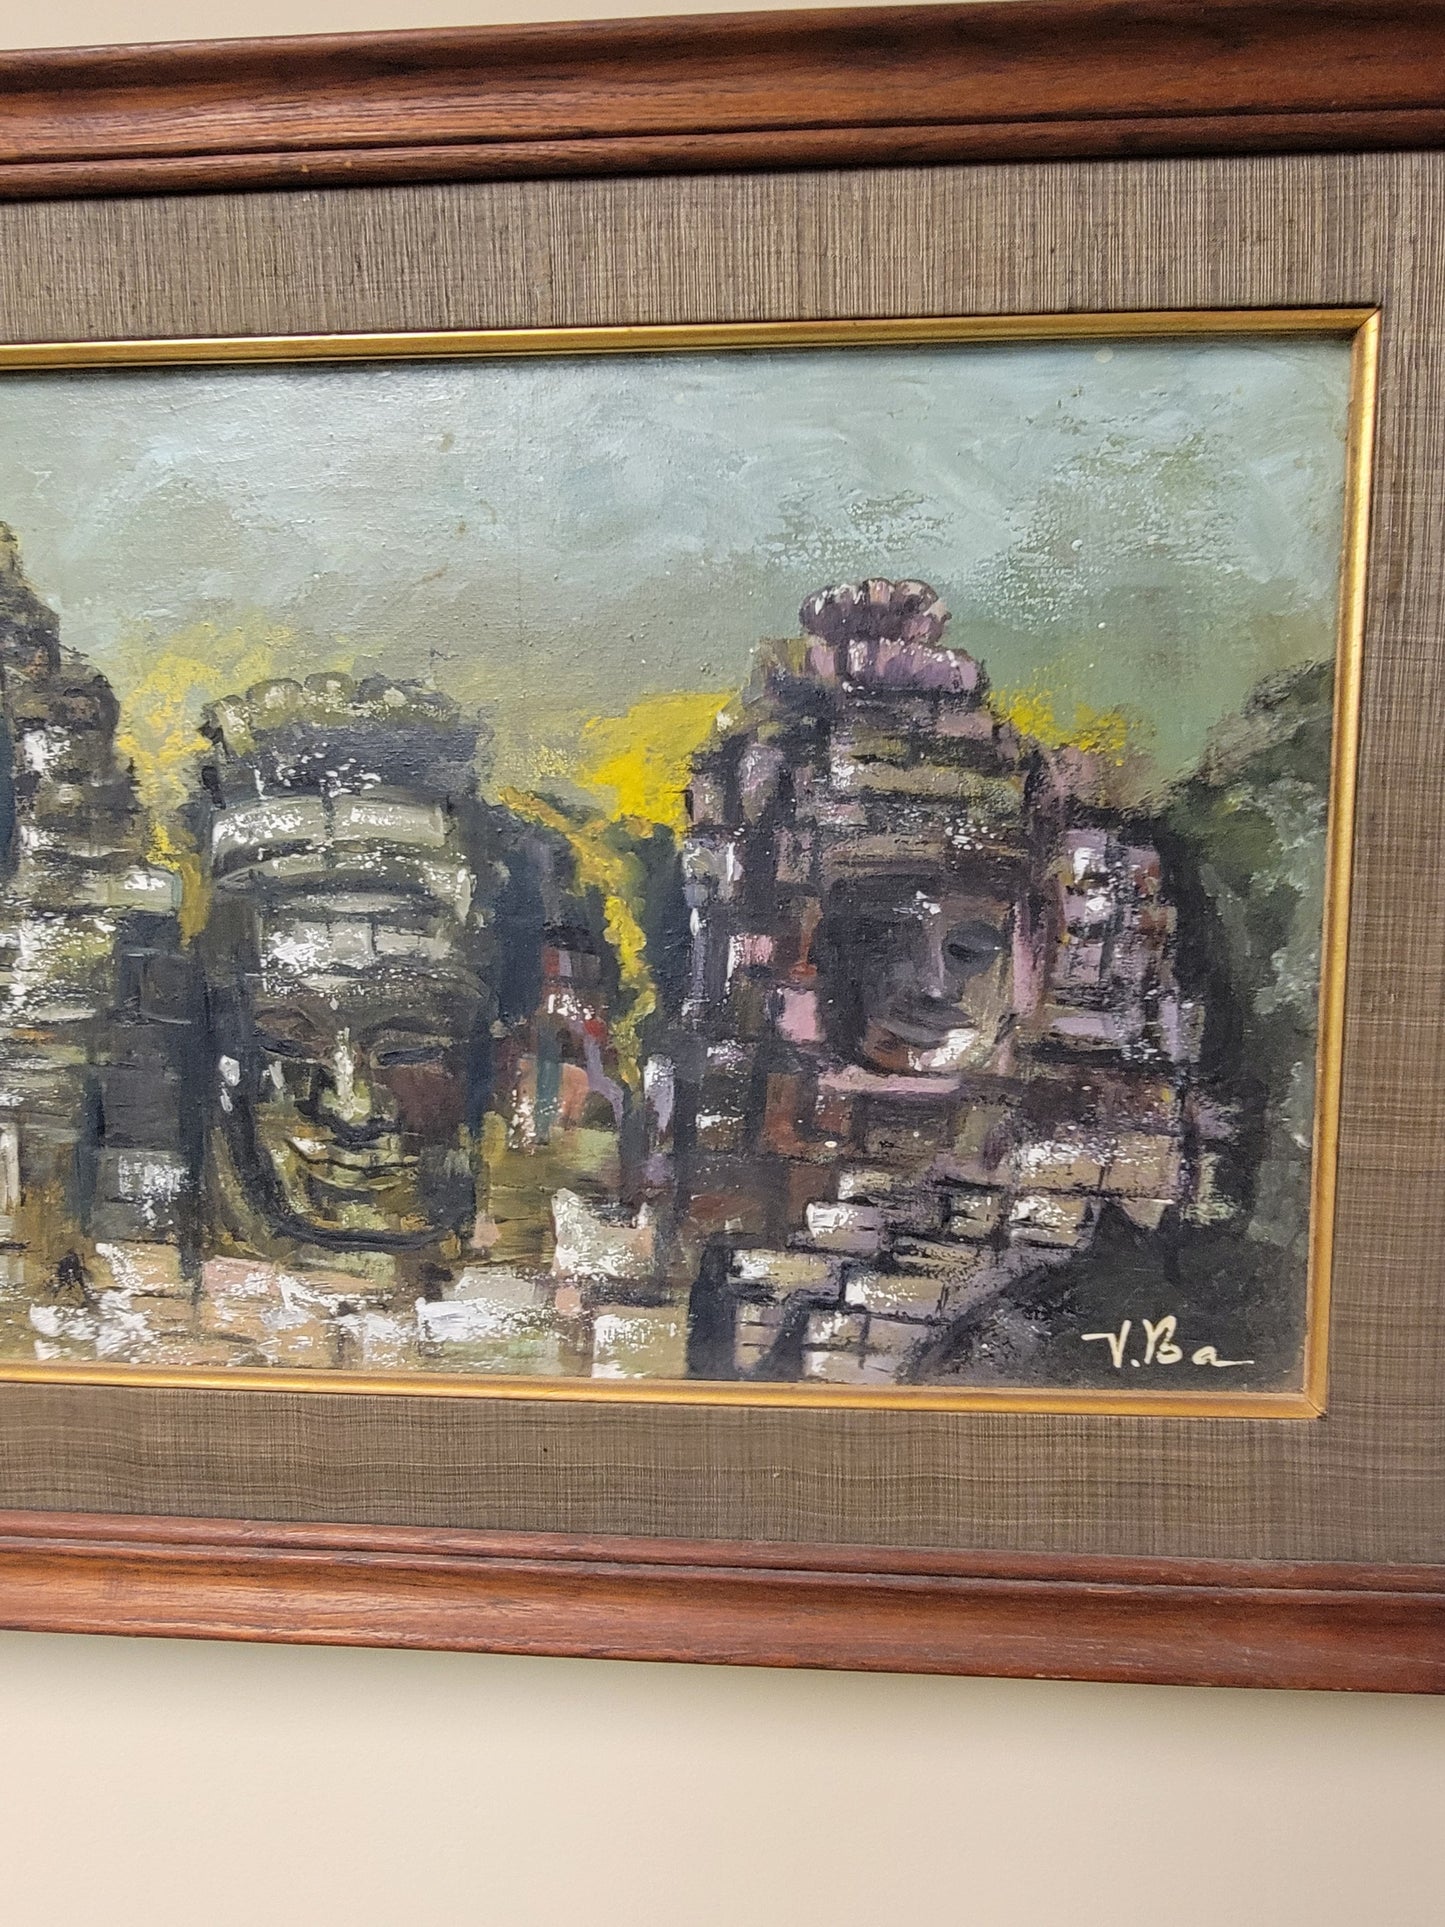 Vintage Mid-Century Signed Scenic Oil Painting on Canvas (Mt. Rushmore-Style)